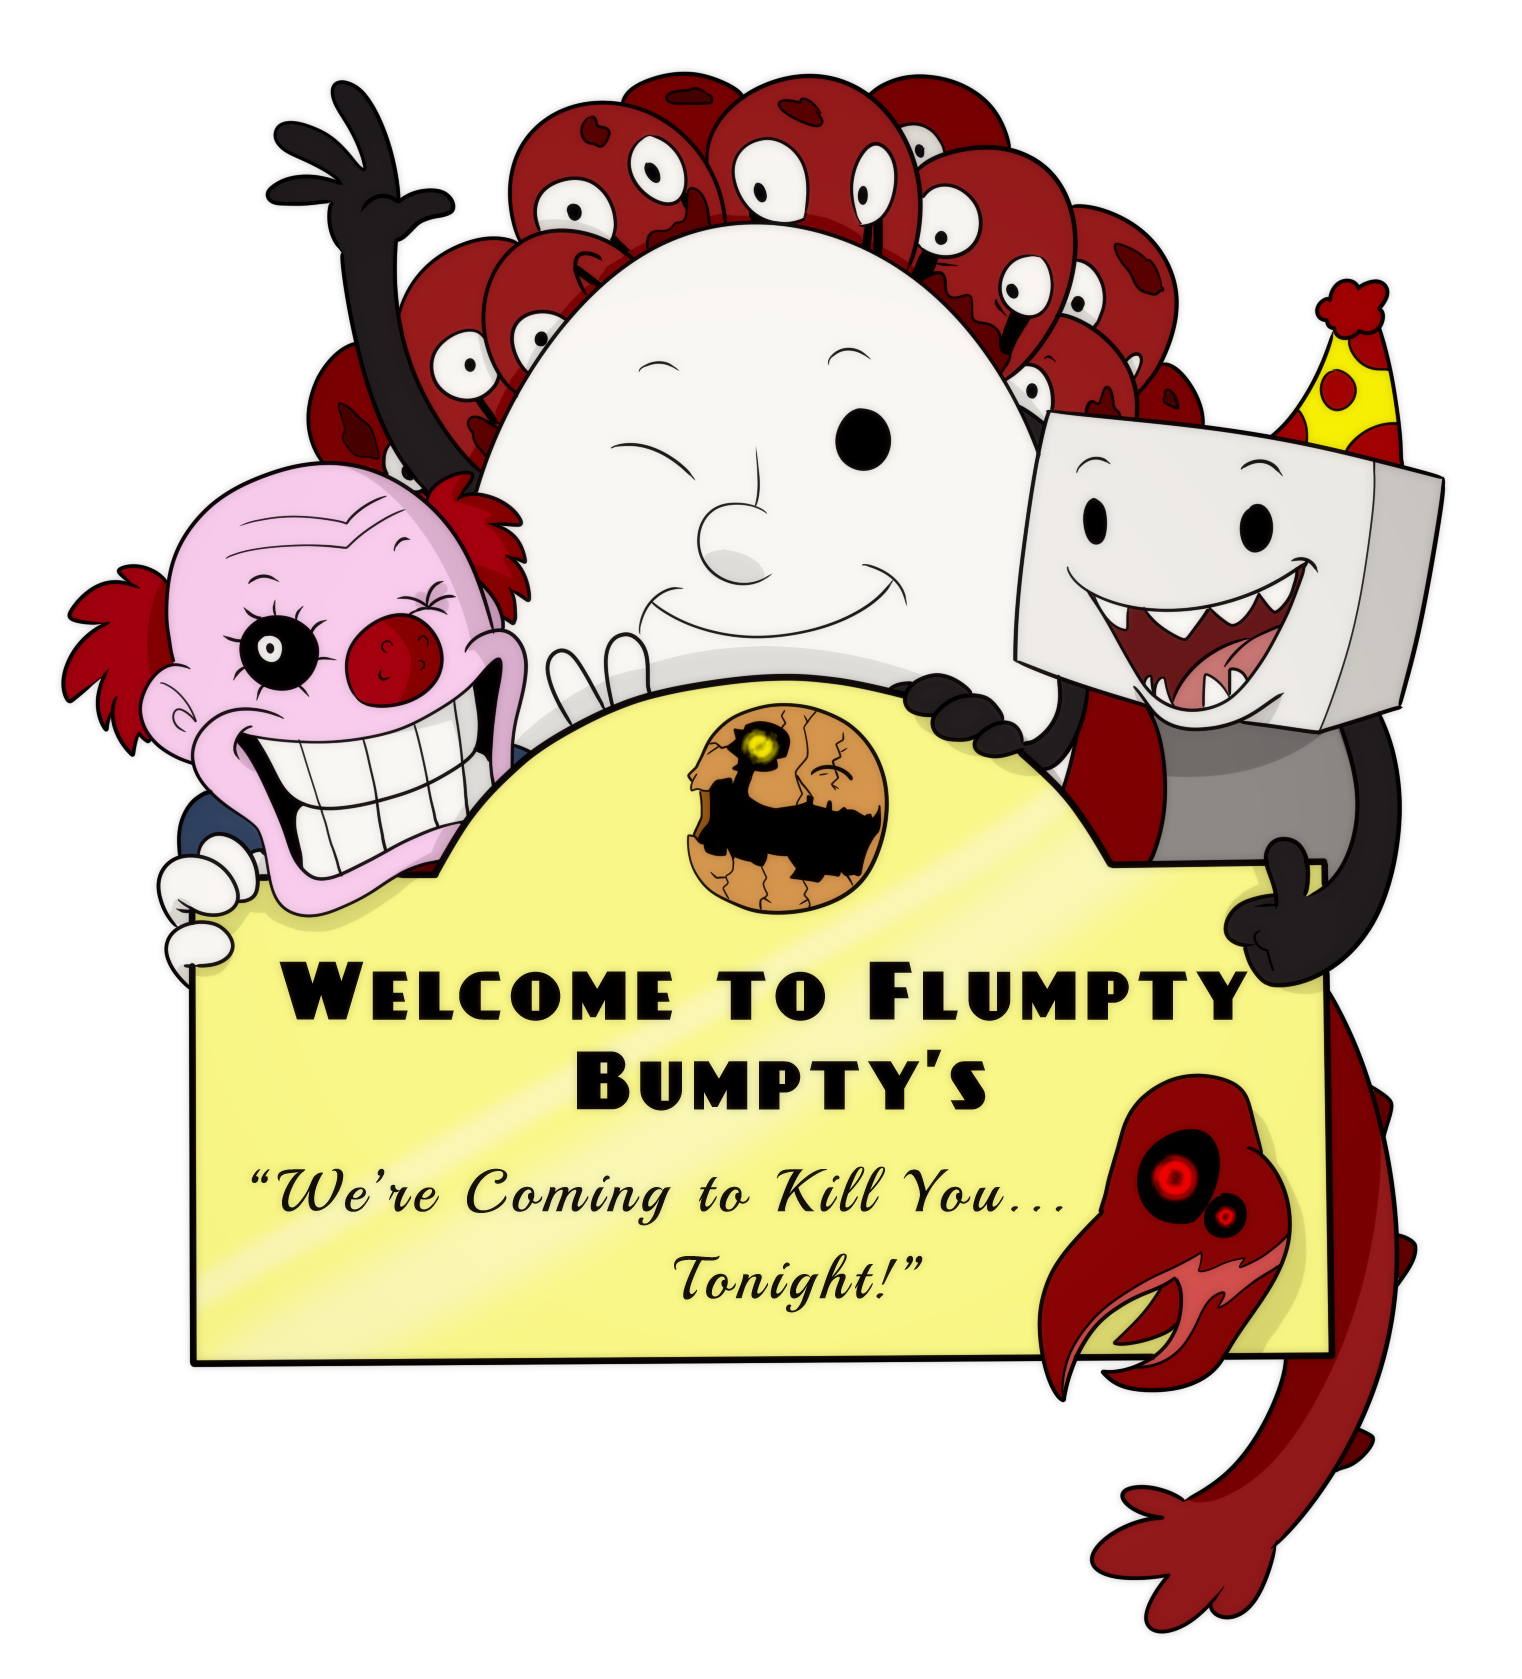 Which One Night At Flumpty's Character Are You?